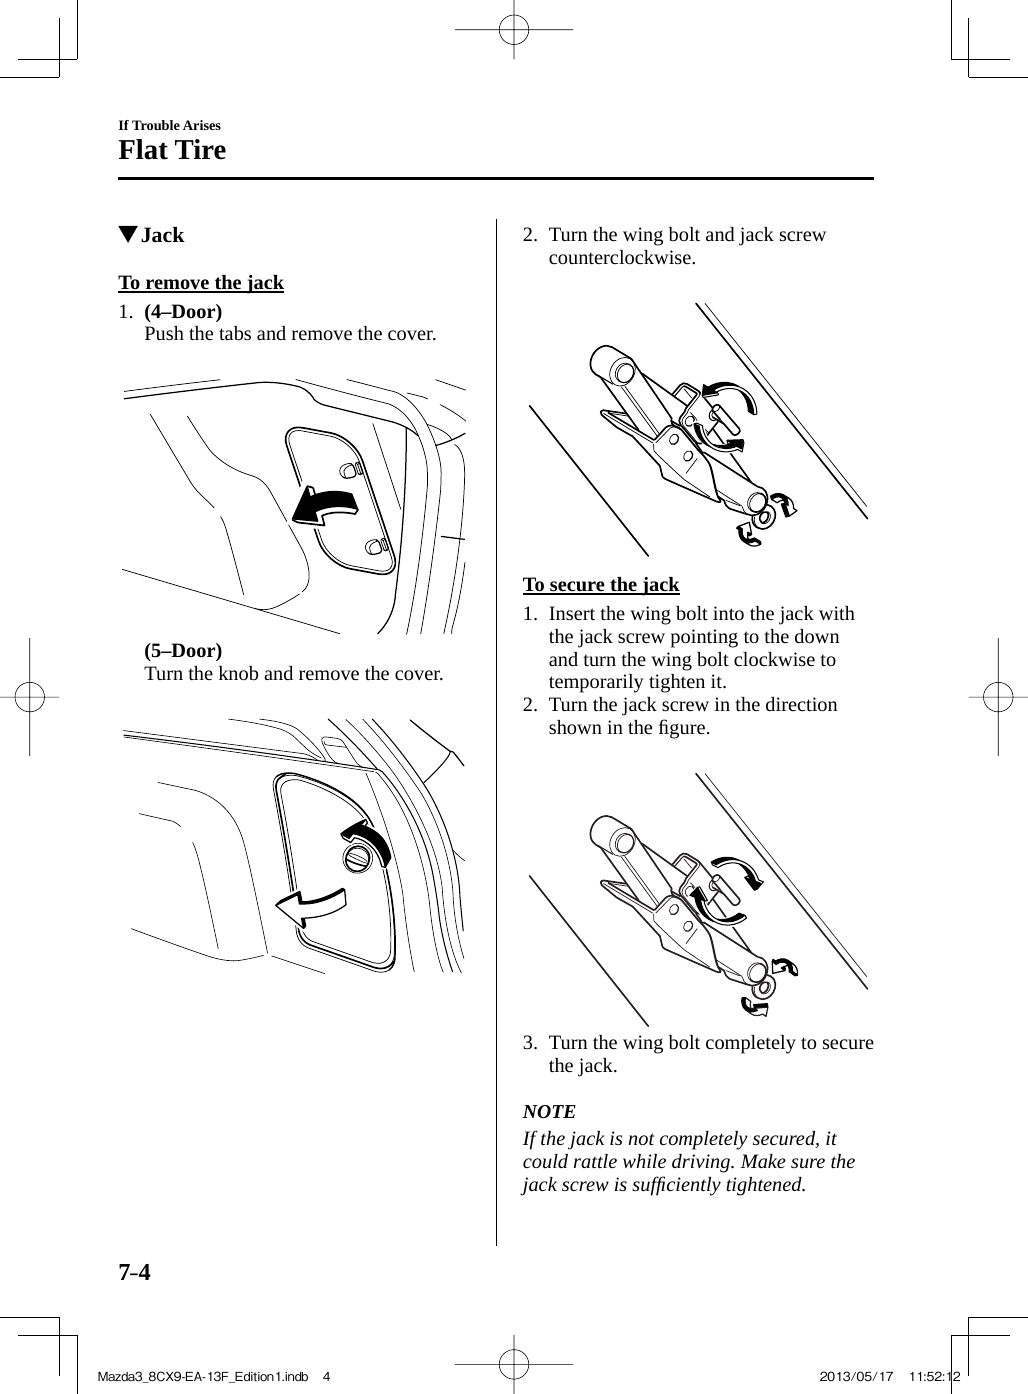 7–4If Trouble ArisesFlat Tire         Jack            To  remove  the  jack     1 .     (4–Door)     Push the tabs and remove the cover.          (5–Door)     Turn the knob and remove the cover.        2.   Turn the wing bolt and jack screw counterclockwise.         To  secure  the  jack     1.   Insert the wing bolt into the jack with the jack screw pointing to the down and turn the wing bolt clockwise to temporarily tighten it.   2.   Turn the jack screw in the direction shown in the ﬁ gure.        3.   Turn the wing bolt completely to secure the jack.       NOTE  If the jack is not completely secured, it could rattle while driving. Make sure the jack screw is sufﬁ ciently tightened.   Mazda3_8CX9-EA-13F_Edition1.indb   4Mazda3_8CX9-EA-13F_Edition1.indb   4 2013/05/17   11:52:122013/05/17   11:52:12